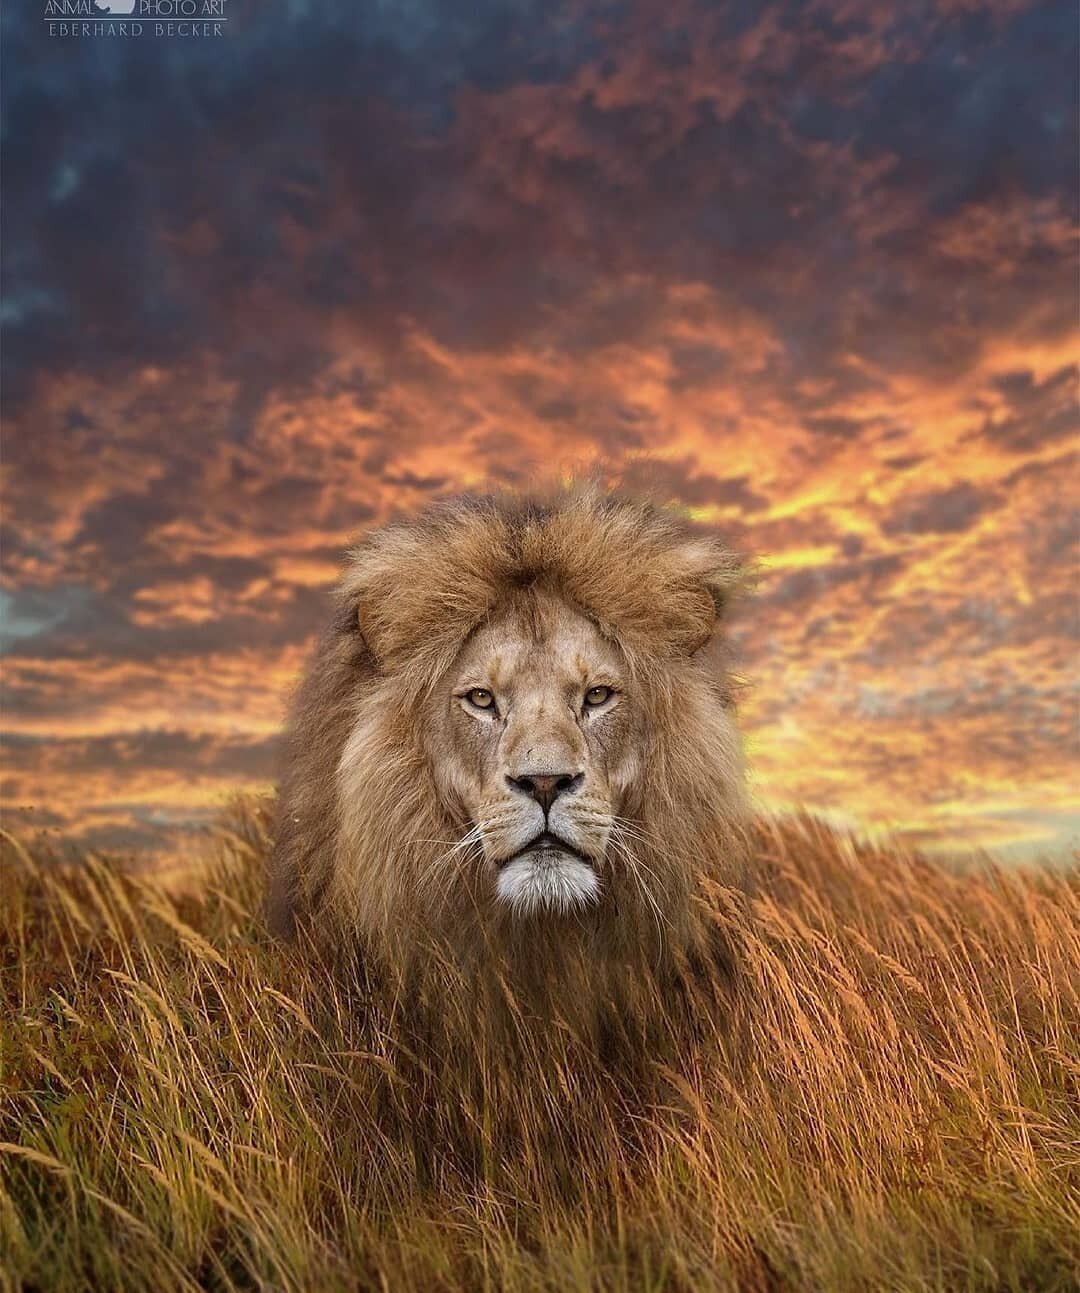 In all his glory 🦁 this is absolutely stunning @eberhardbecker_photography, congratulations on your feature! 

----------------------------------------------------------------------

What we do:
NOT just another Instagram repost page, we have the pr